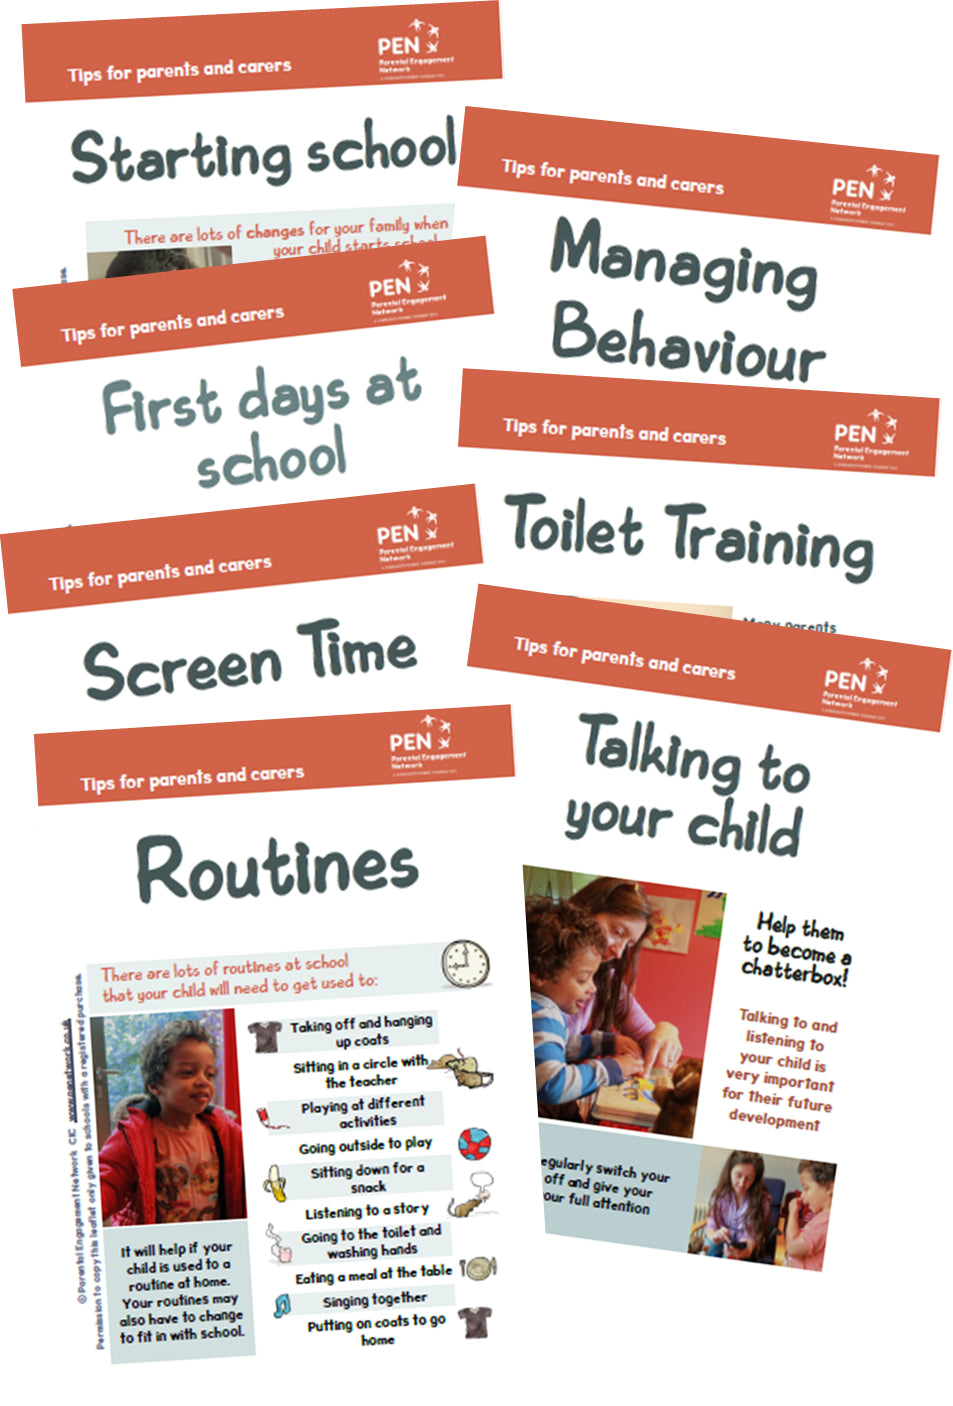 A comprehensive project pack designed for schools and nurseries to foster learning partnerships with parents and prepare children and families for school. Resources are provided as PDF's aswell as a printed 98 page book in a practical wiro-bound design. This image shows some of the parent leaflets: Starting School; Managing Behaviour; First Days at School; Toilet Training; Screen Time; Talking to Your Child; Routines.